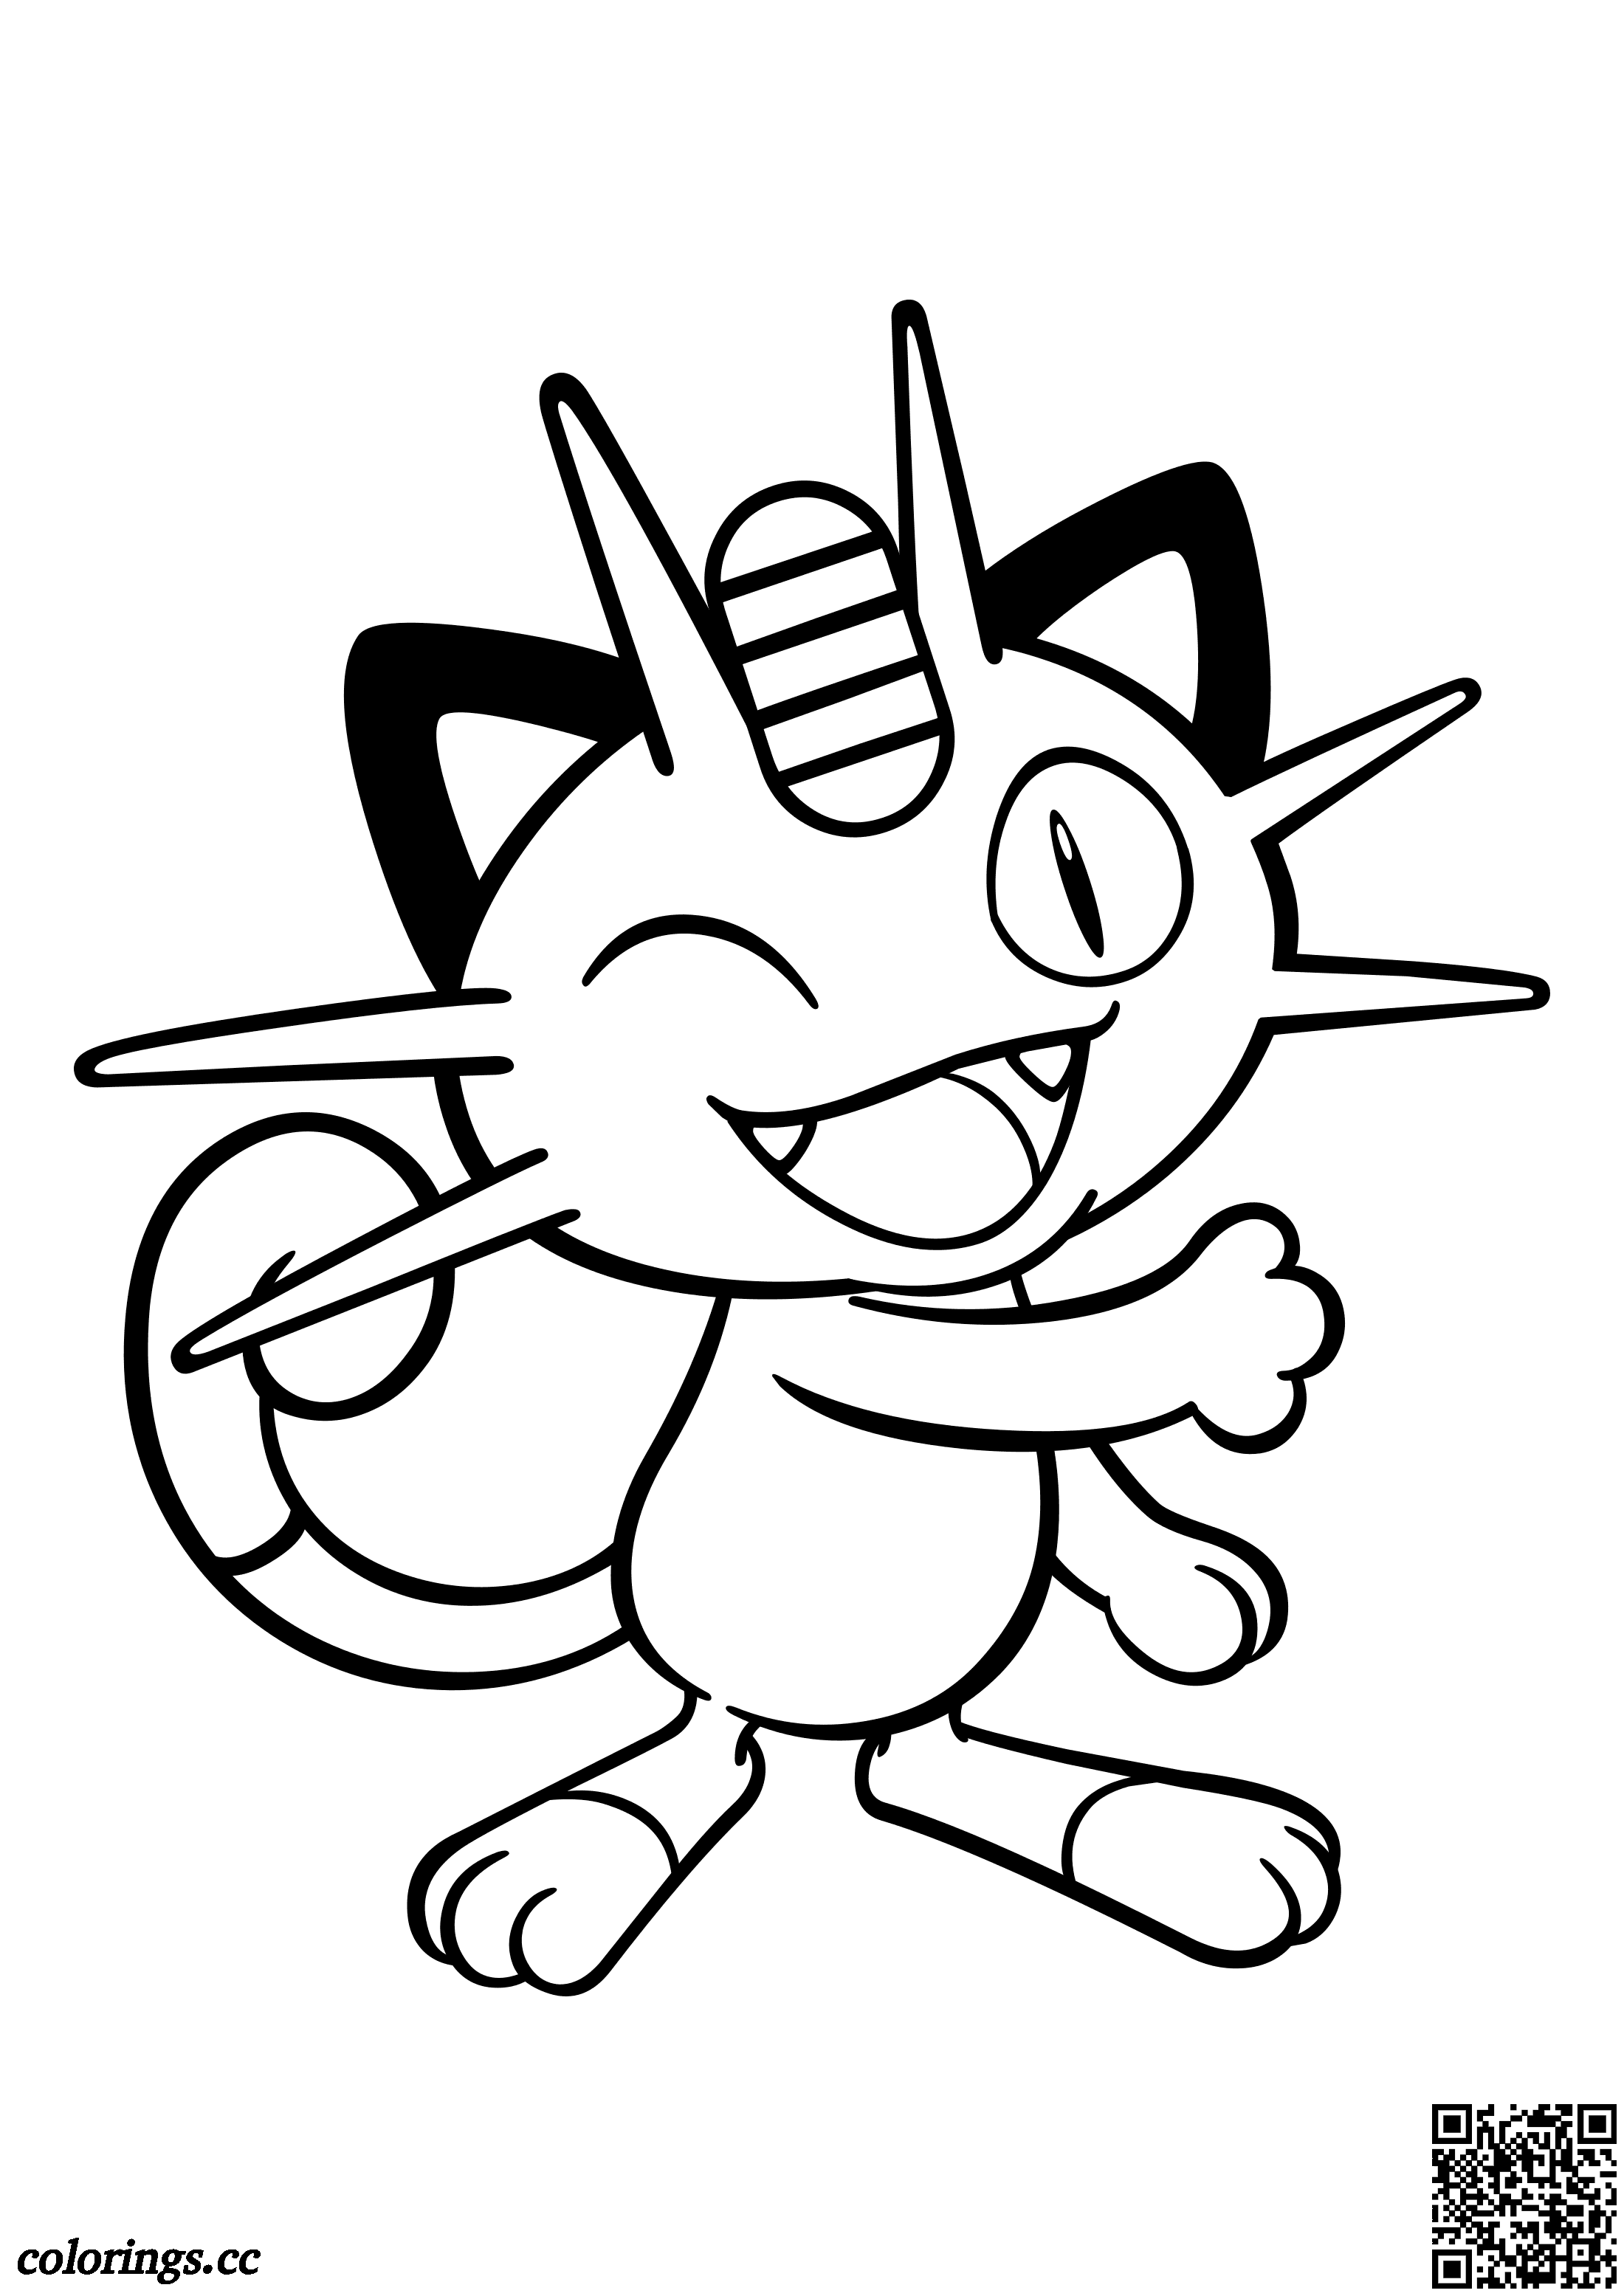 052 - Meowth coloring pages, Pokemon coloring pages - Colorings.cc